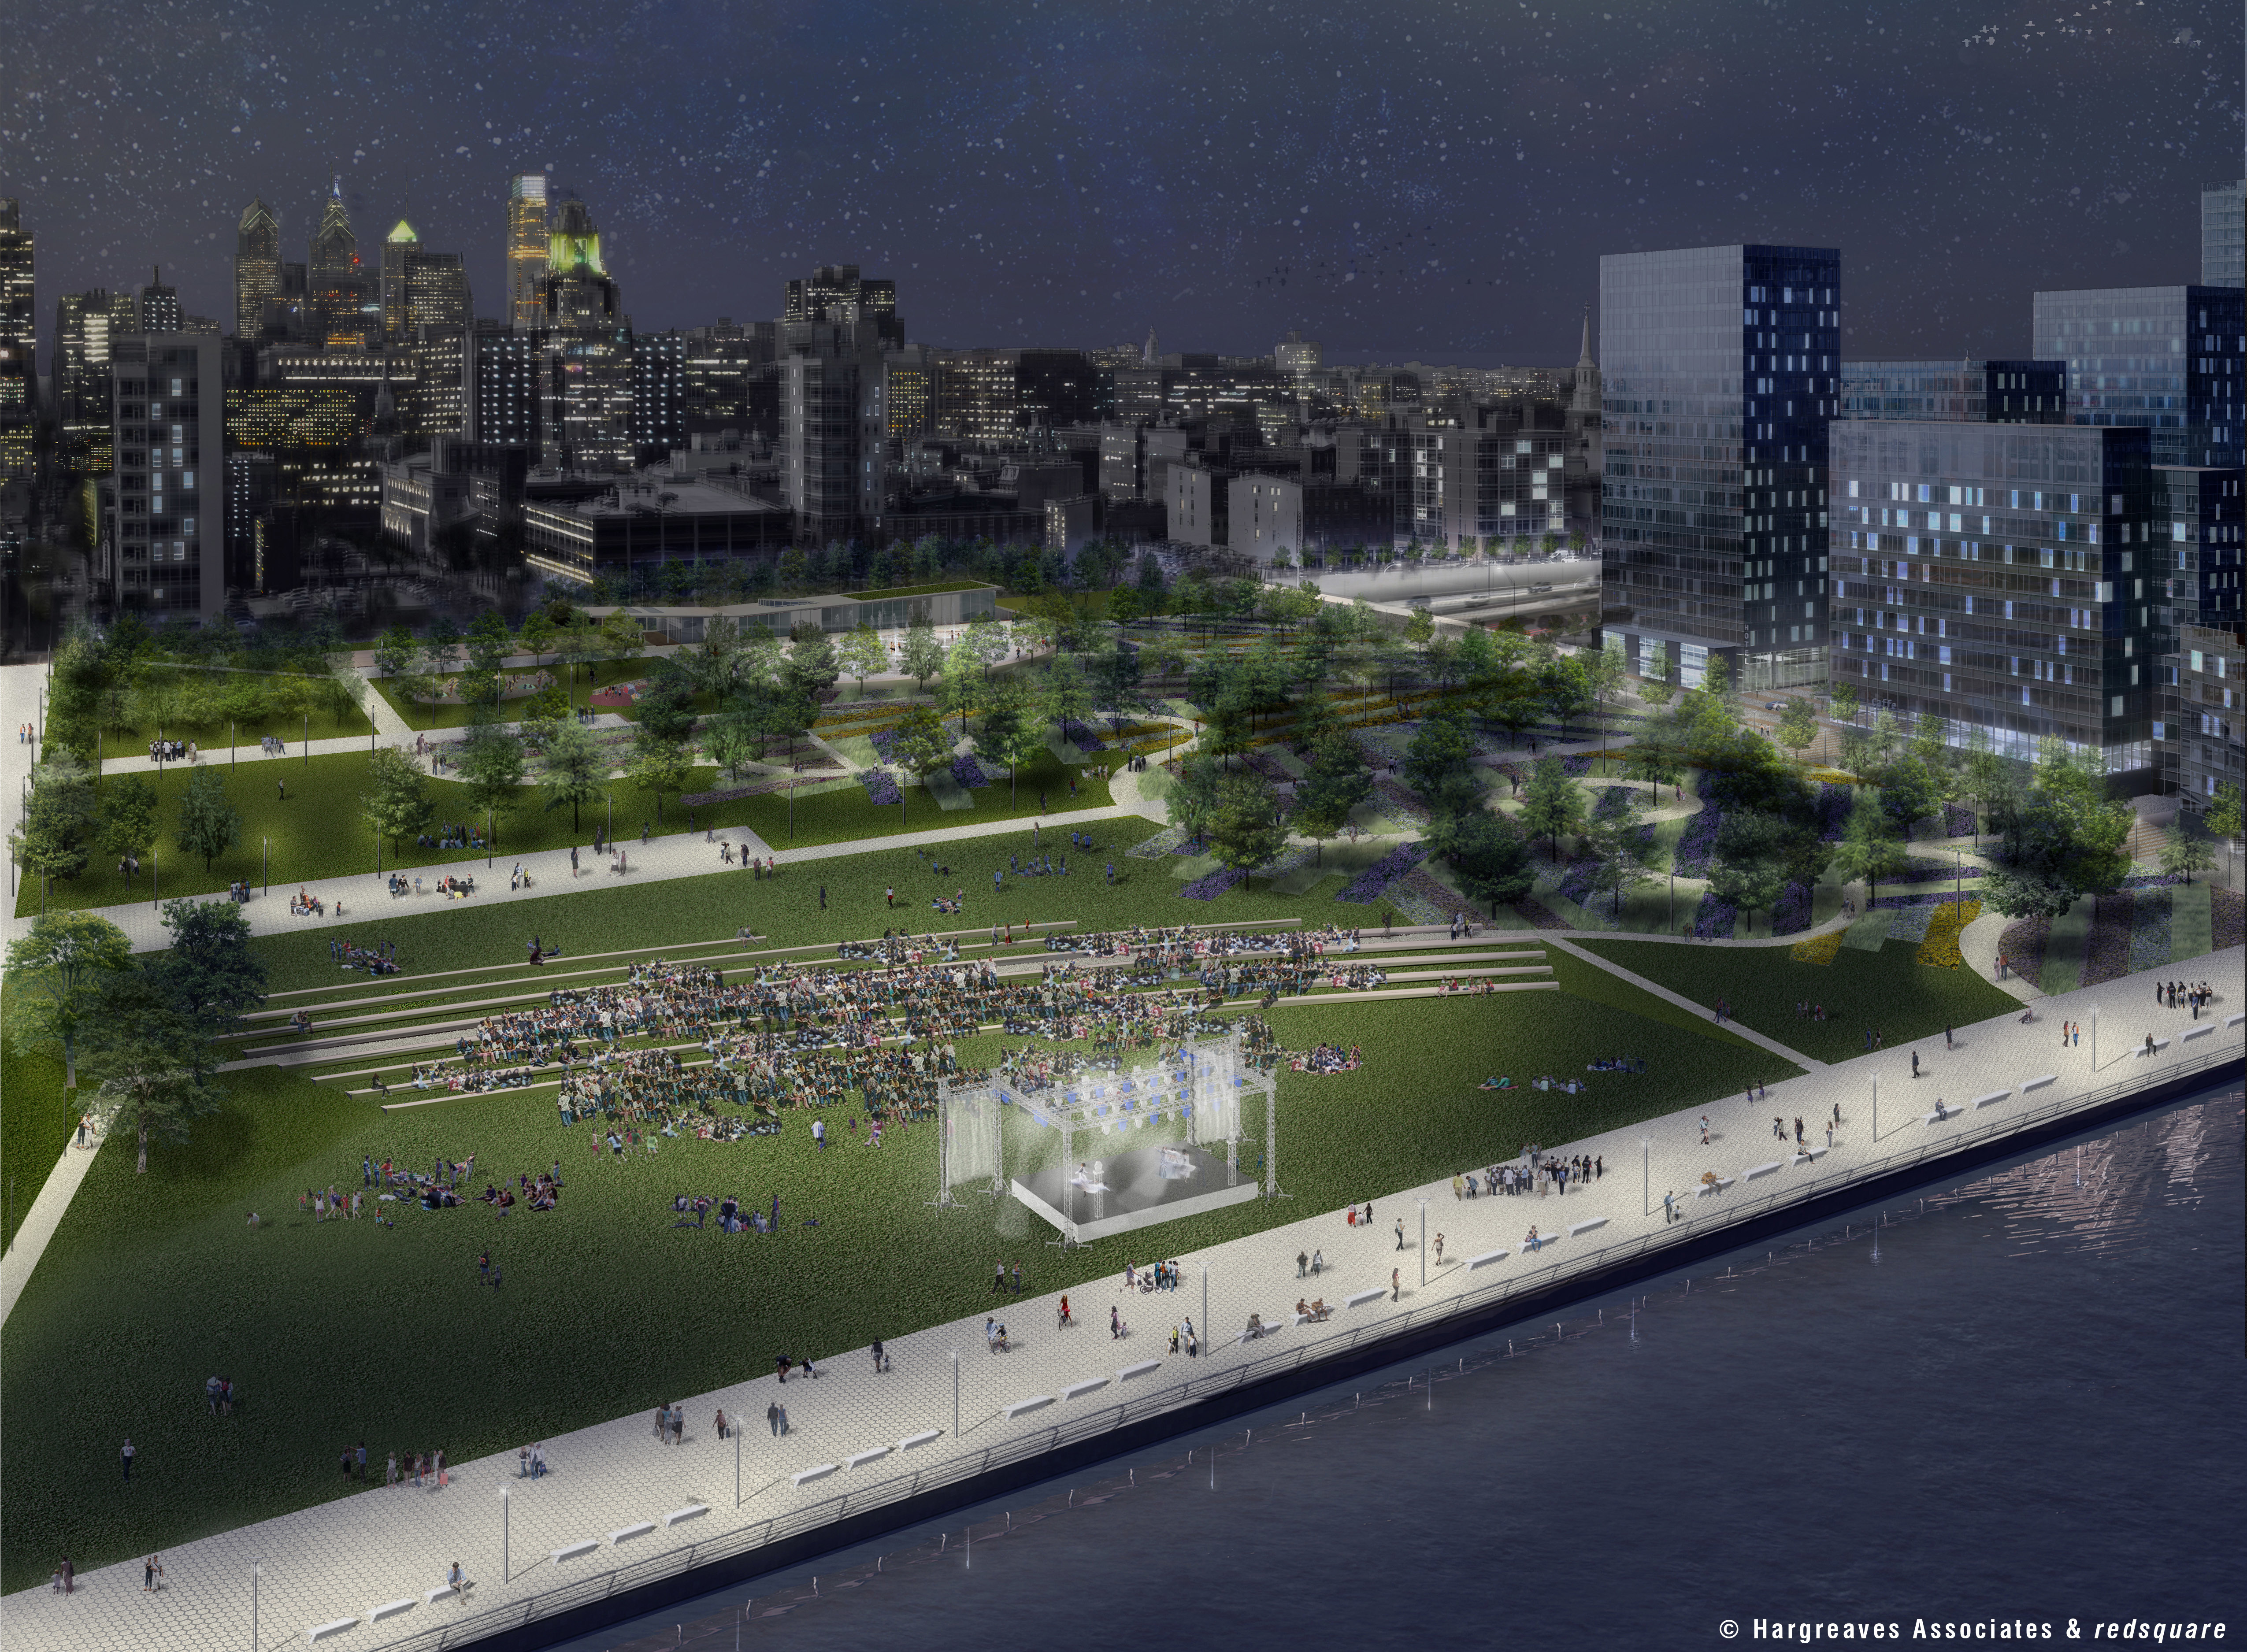 Penns Landing Park, night view, © Hargreaves Associates & redsquare